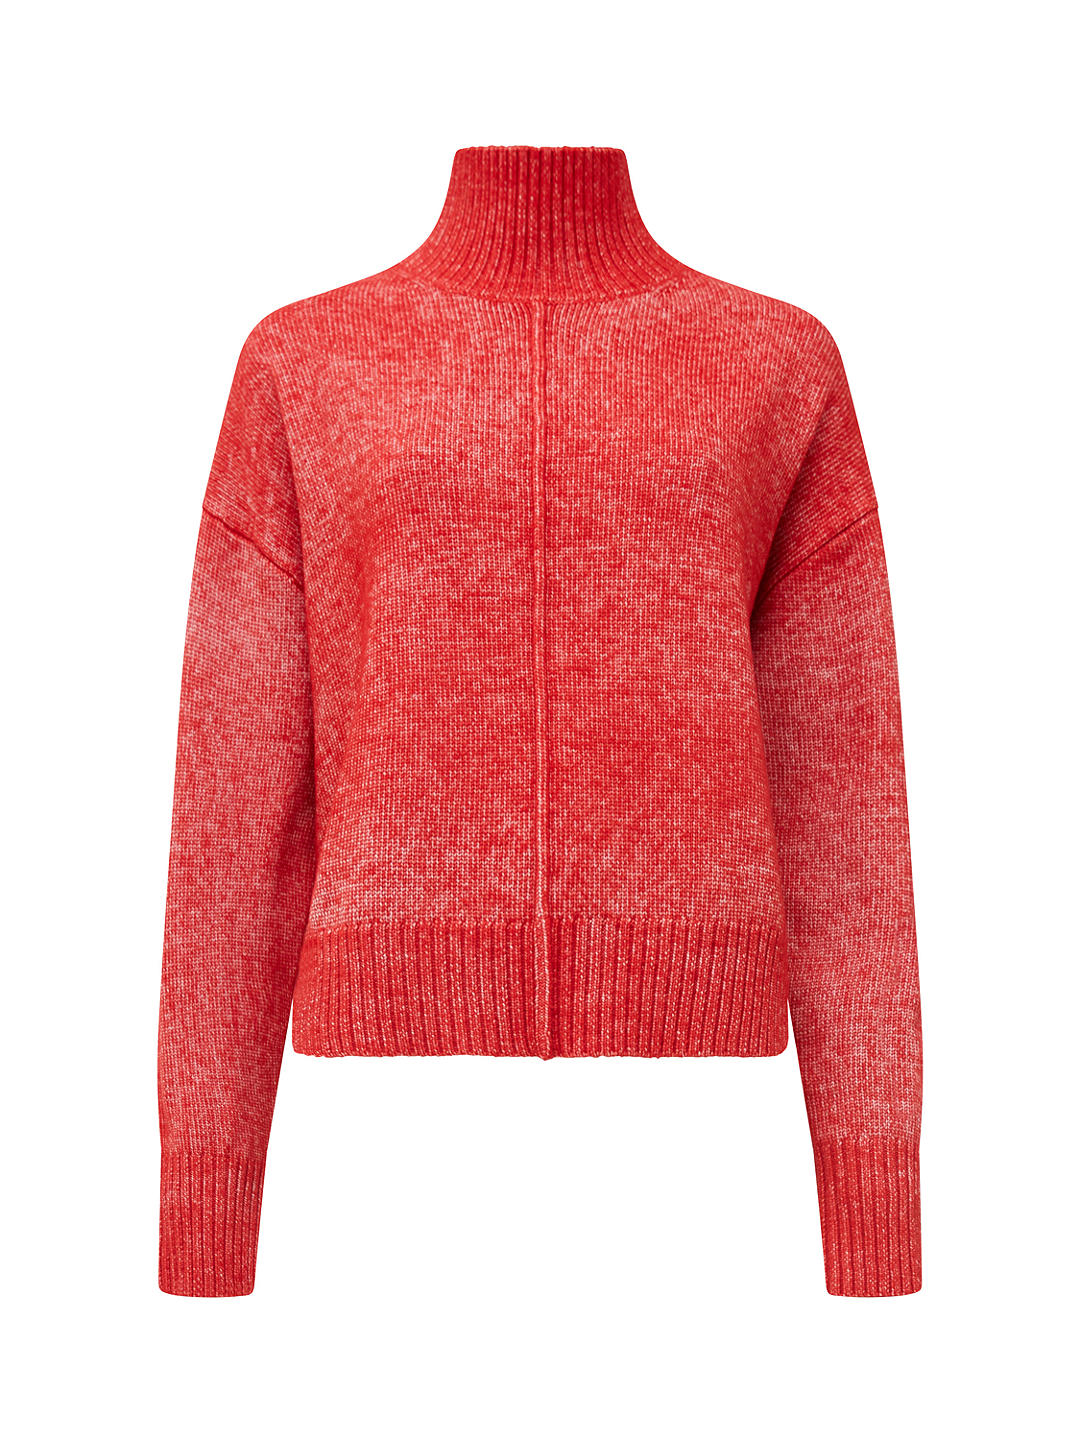 French Connection Kessy Plain Jumper, Warm Red